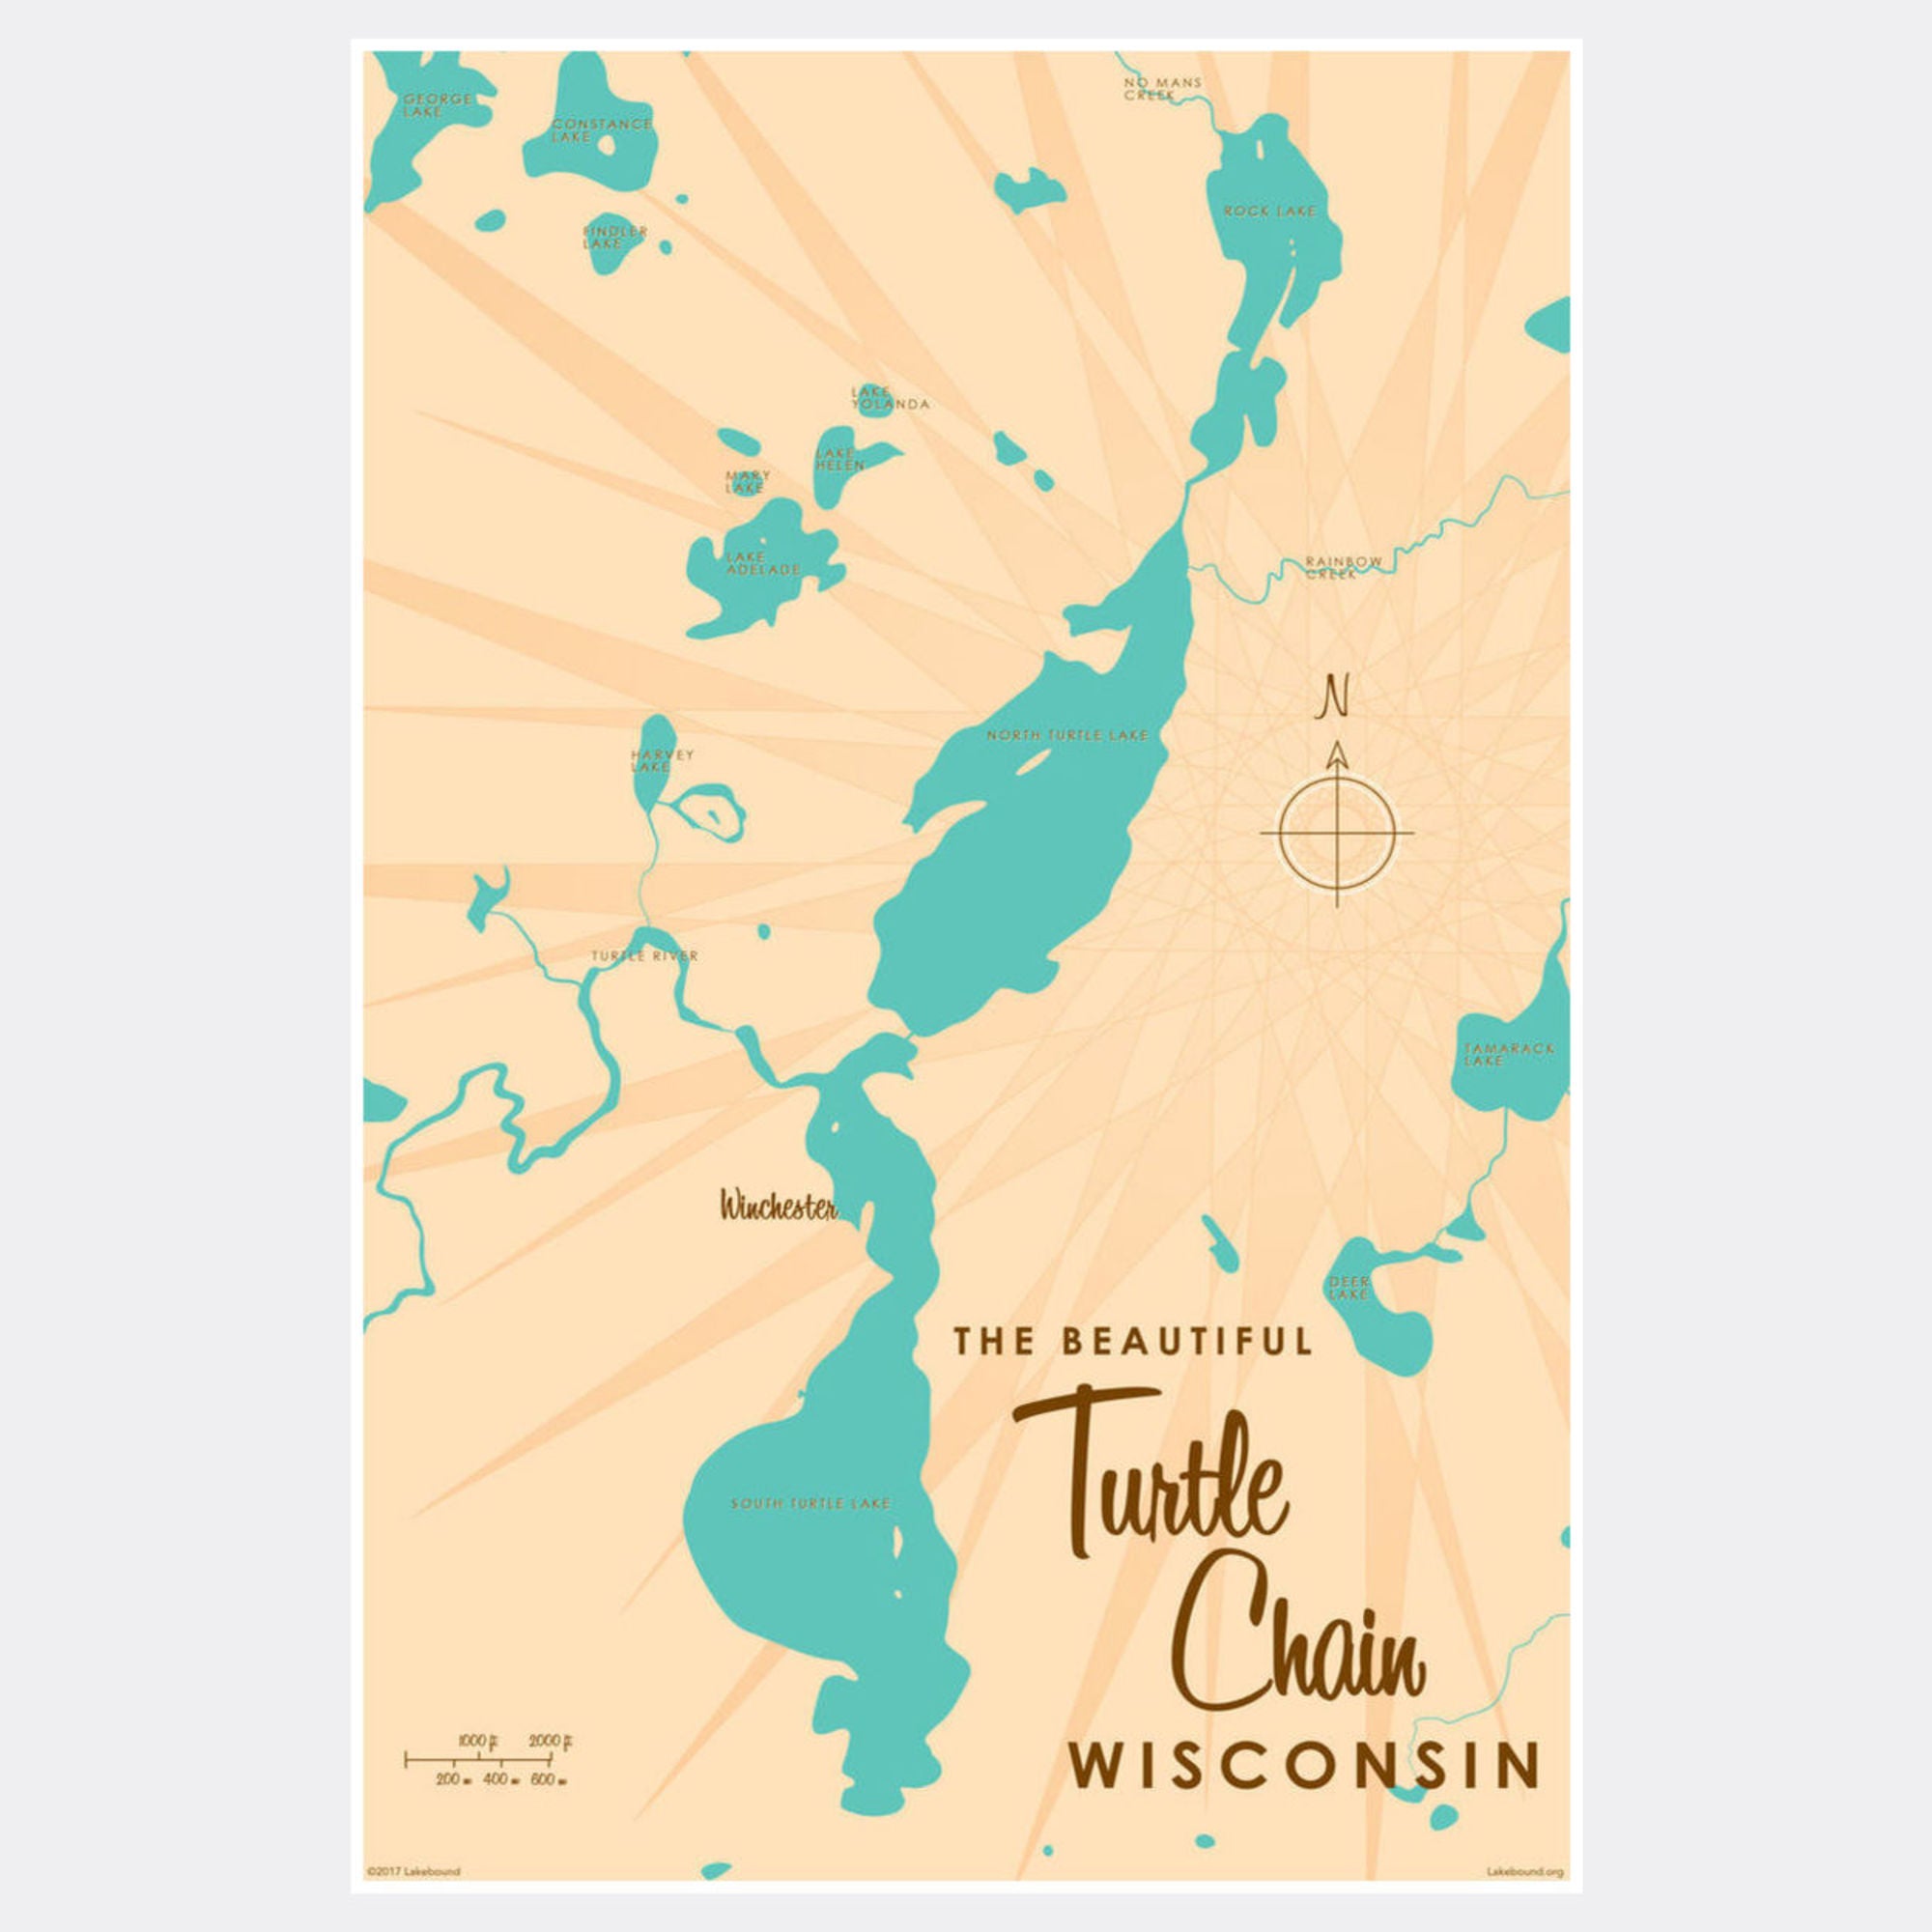 Turtle Chain Wisconsin, Paper Print